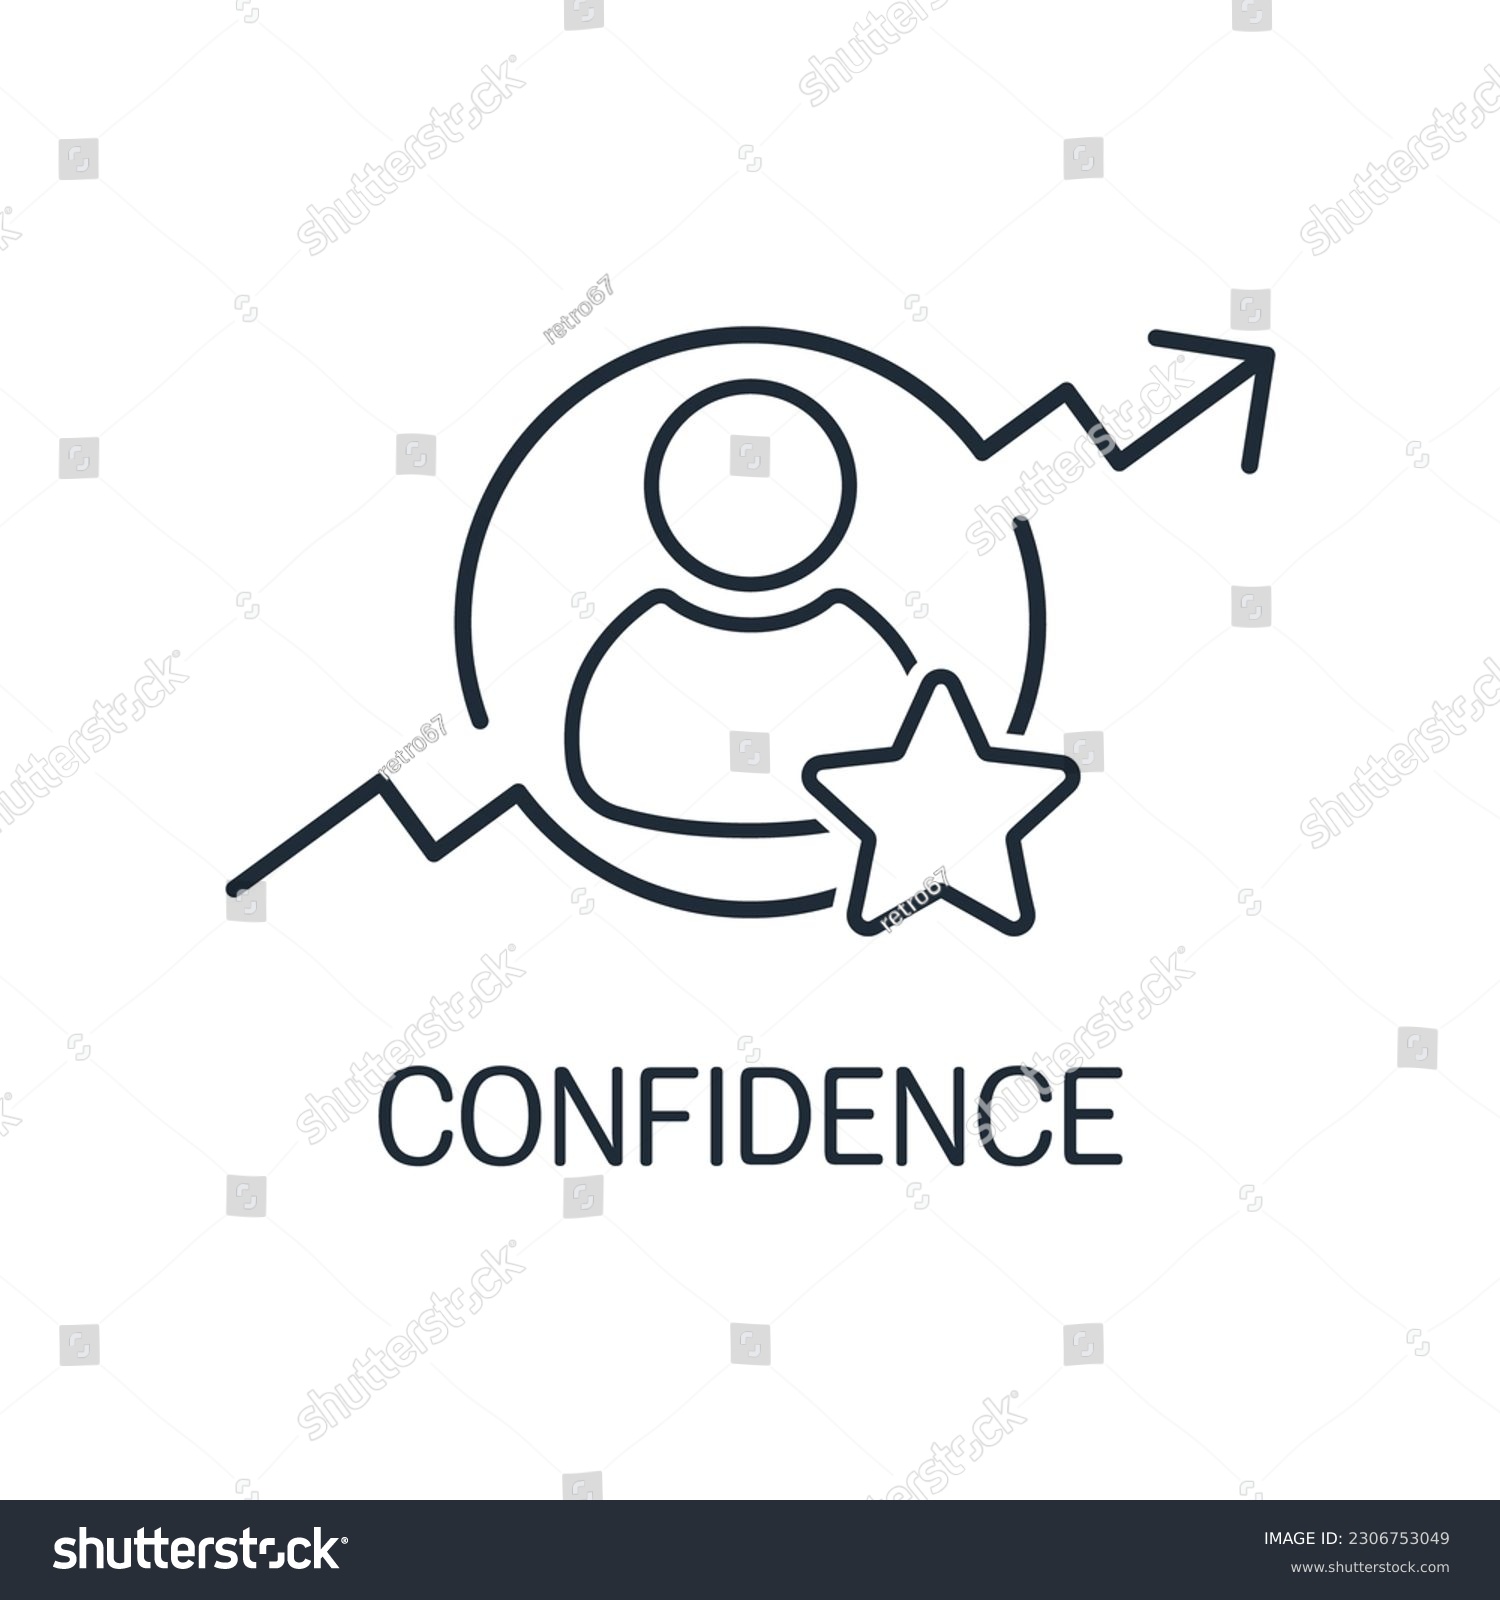 Growing self-confidence. Personal growth. Vector linear icon isolated on white background. #2306753049